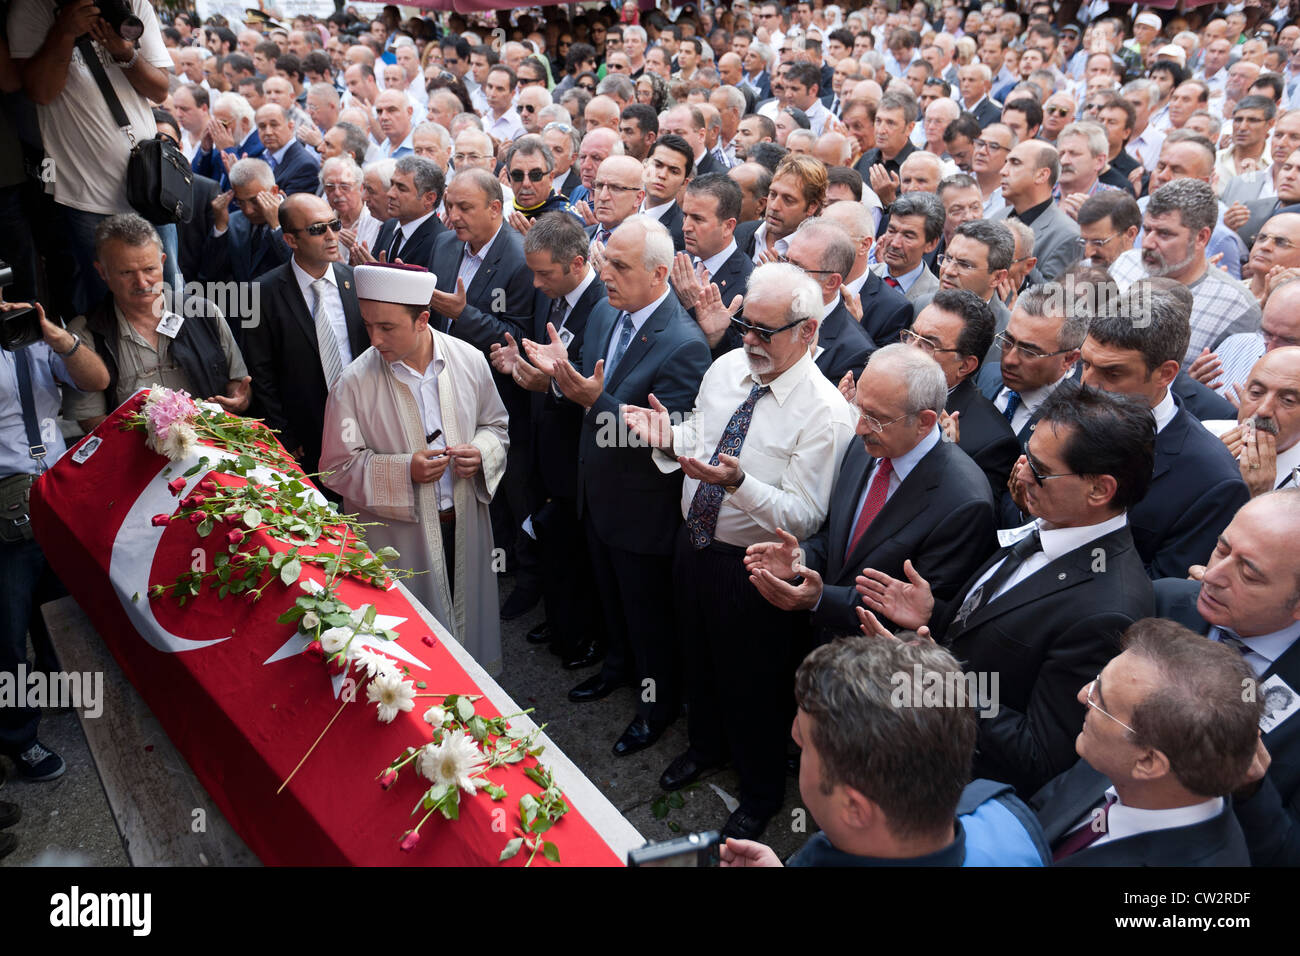 The Funeral of Ülkü Adatepe, the adopted daughter of the founder of the ...